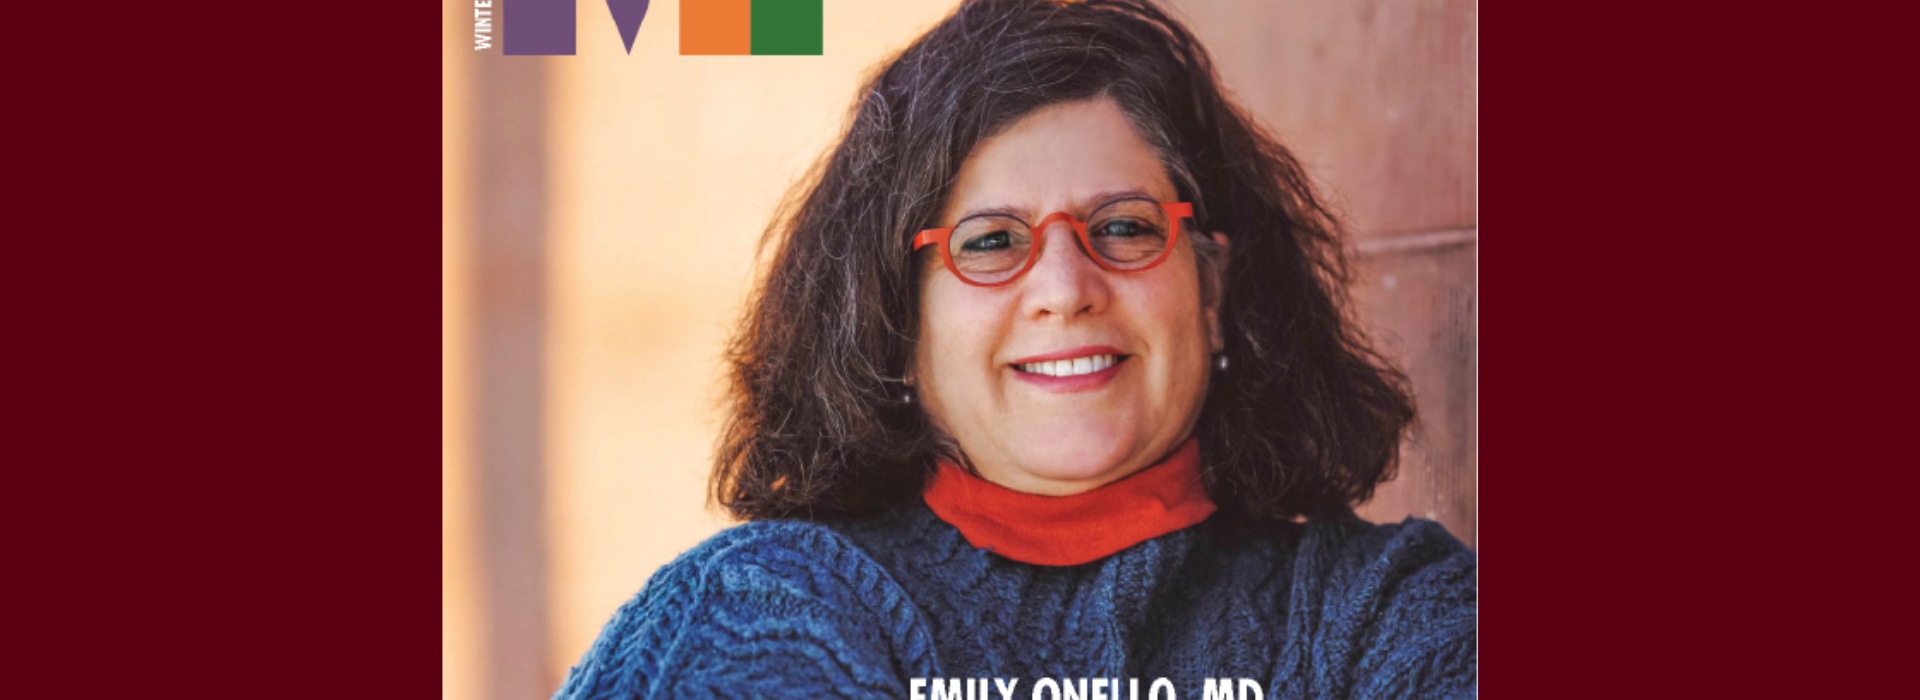 Dr. Emily Onello Profiles Prominent Rural Medical Educators